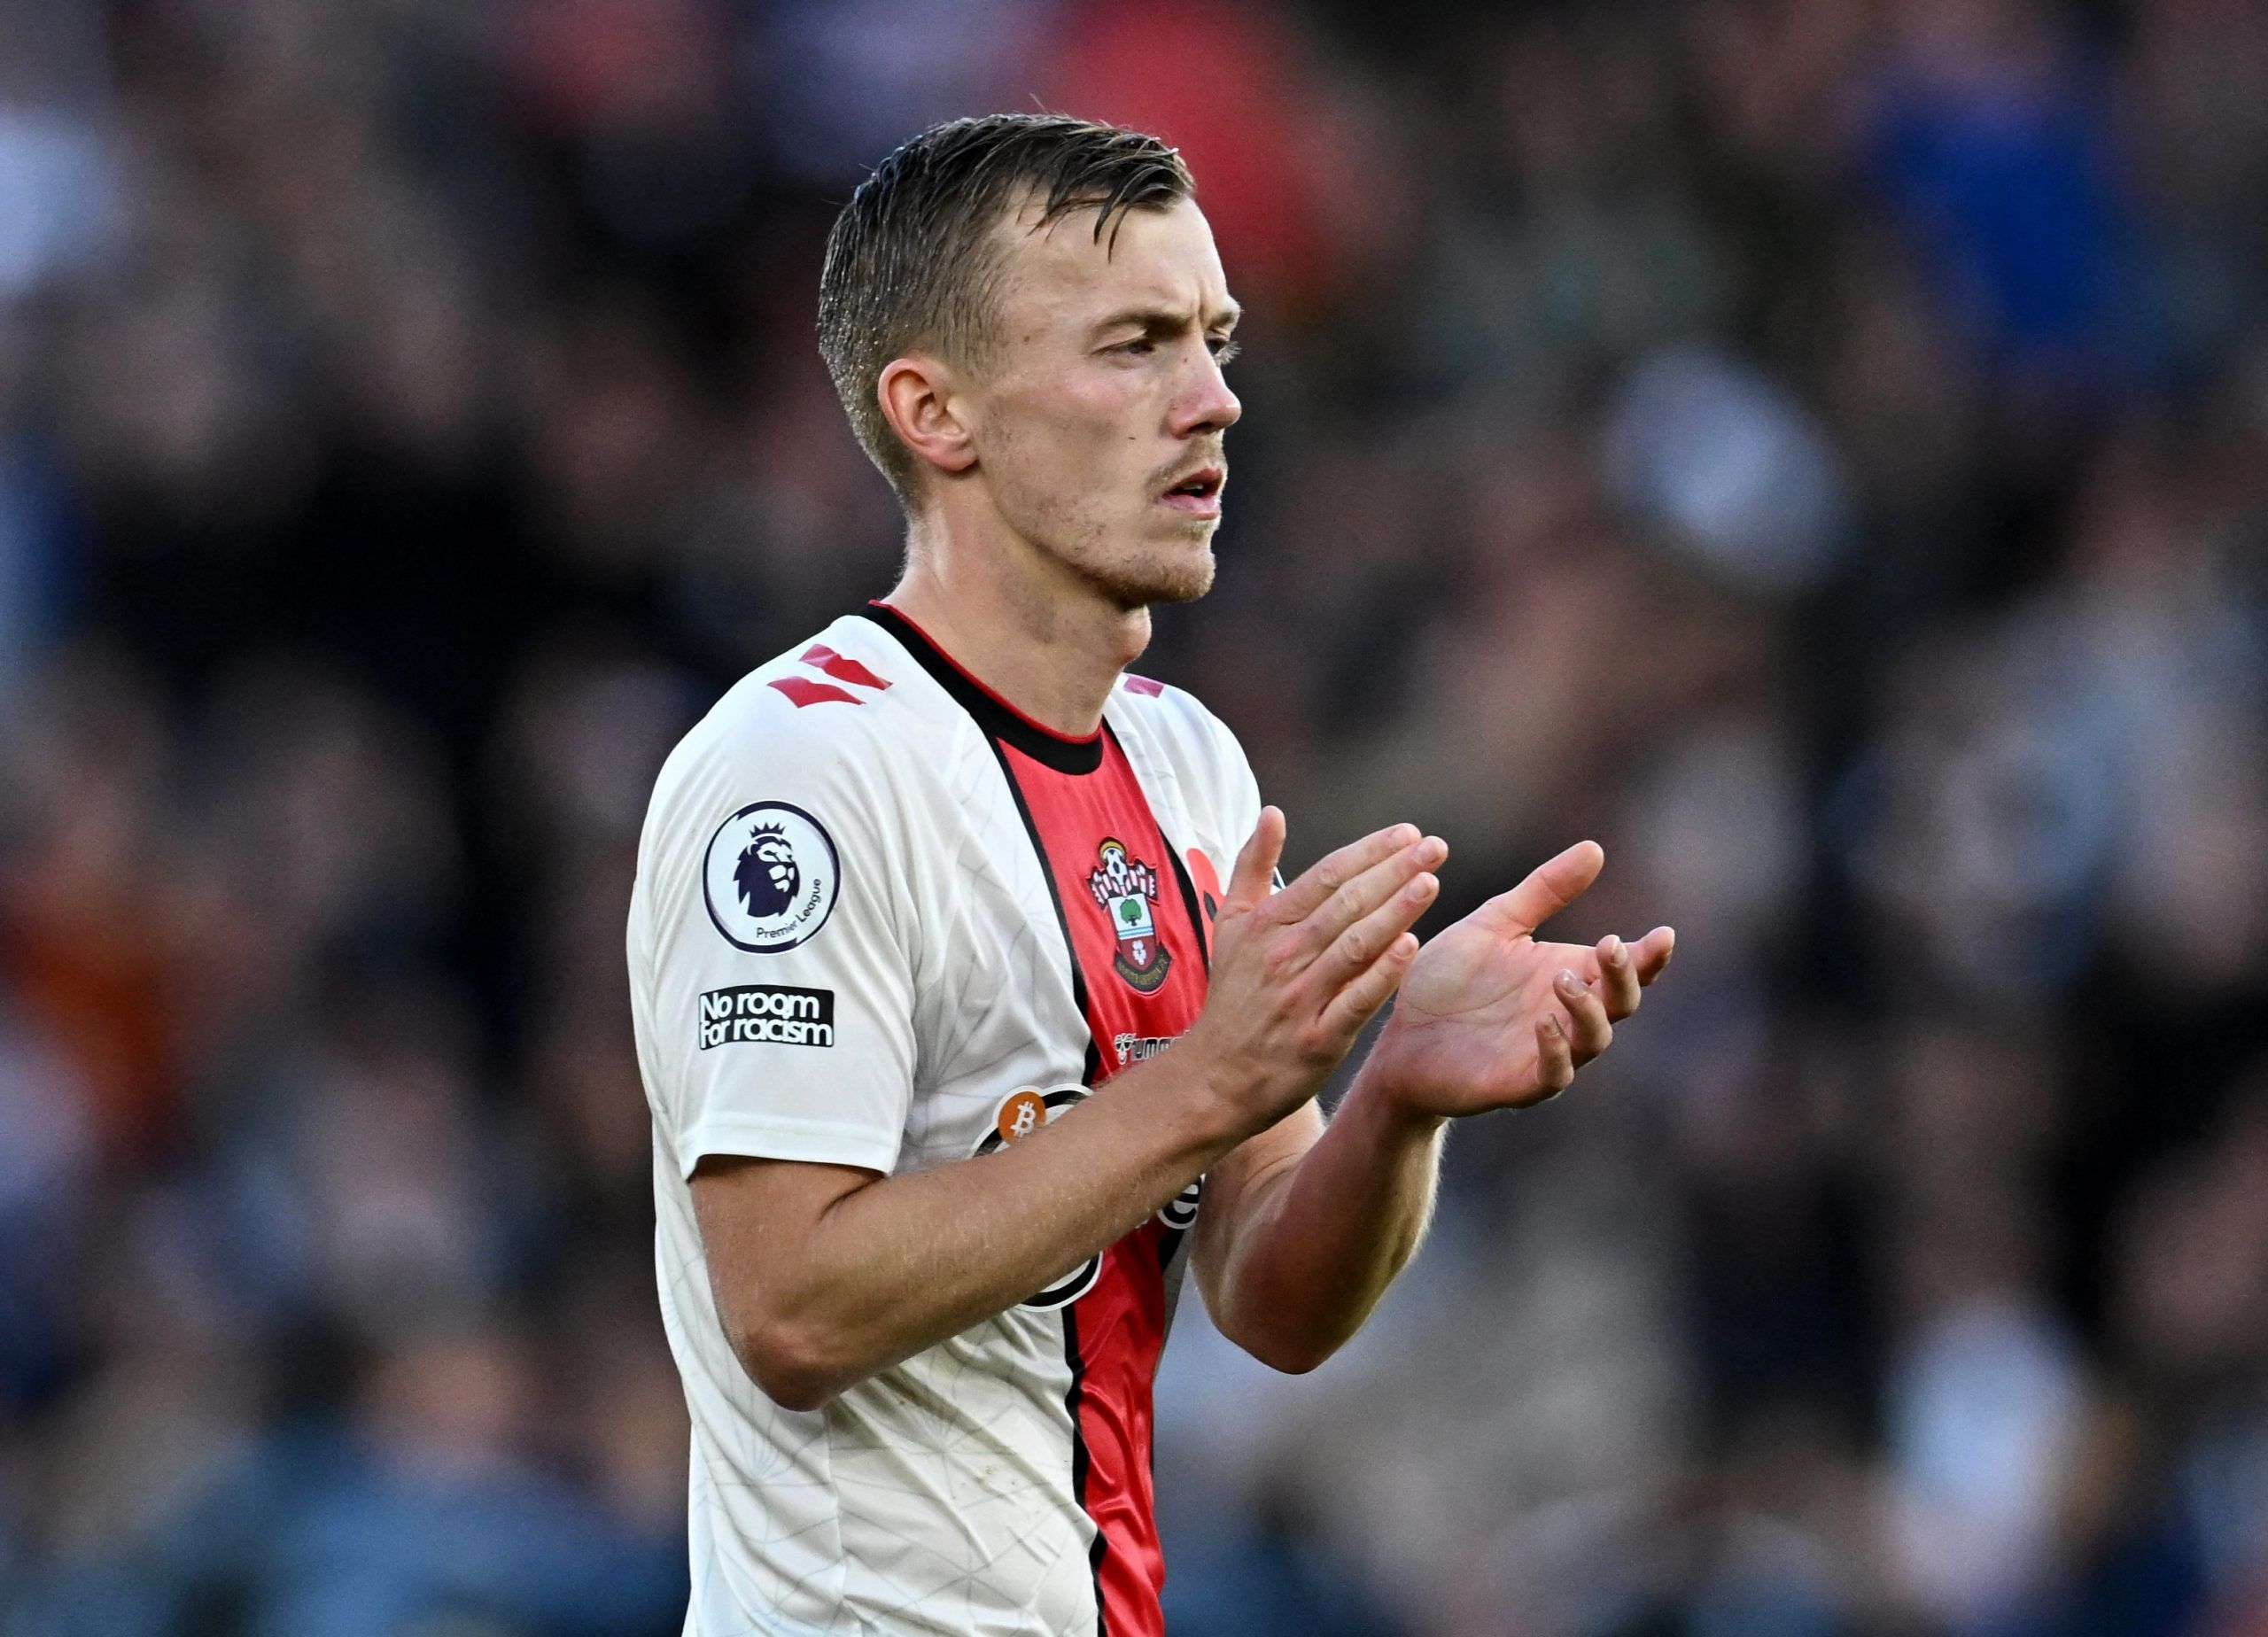 Southampton: James Ward-Prowse ‘very frustrated’ after World Cup omission -Follow up